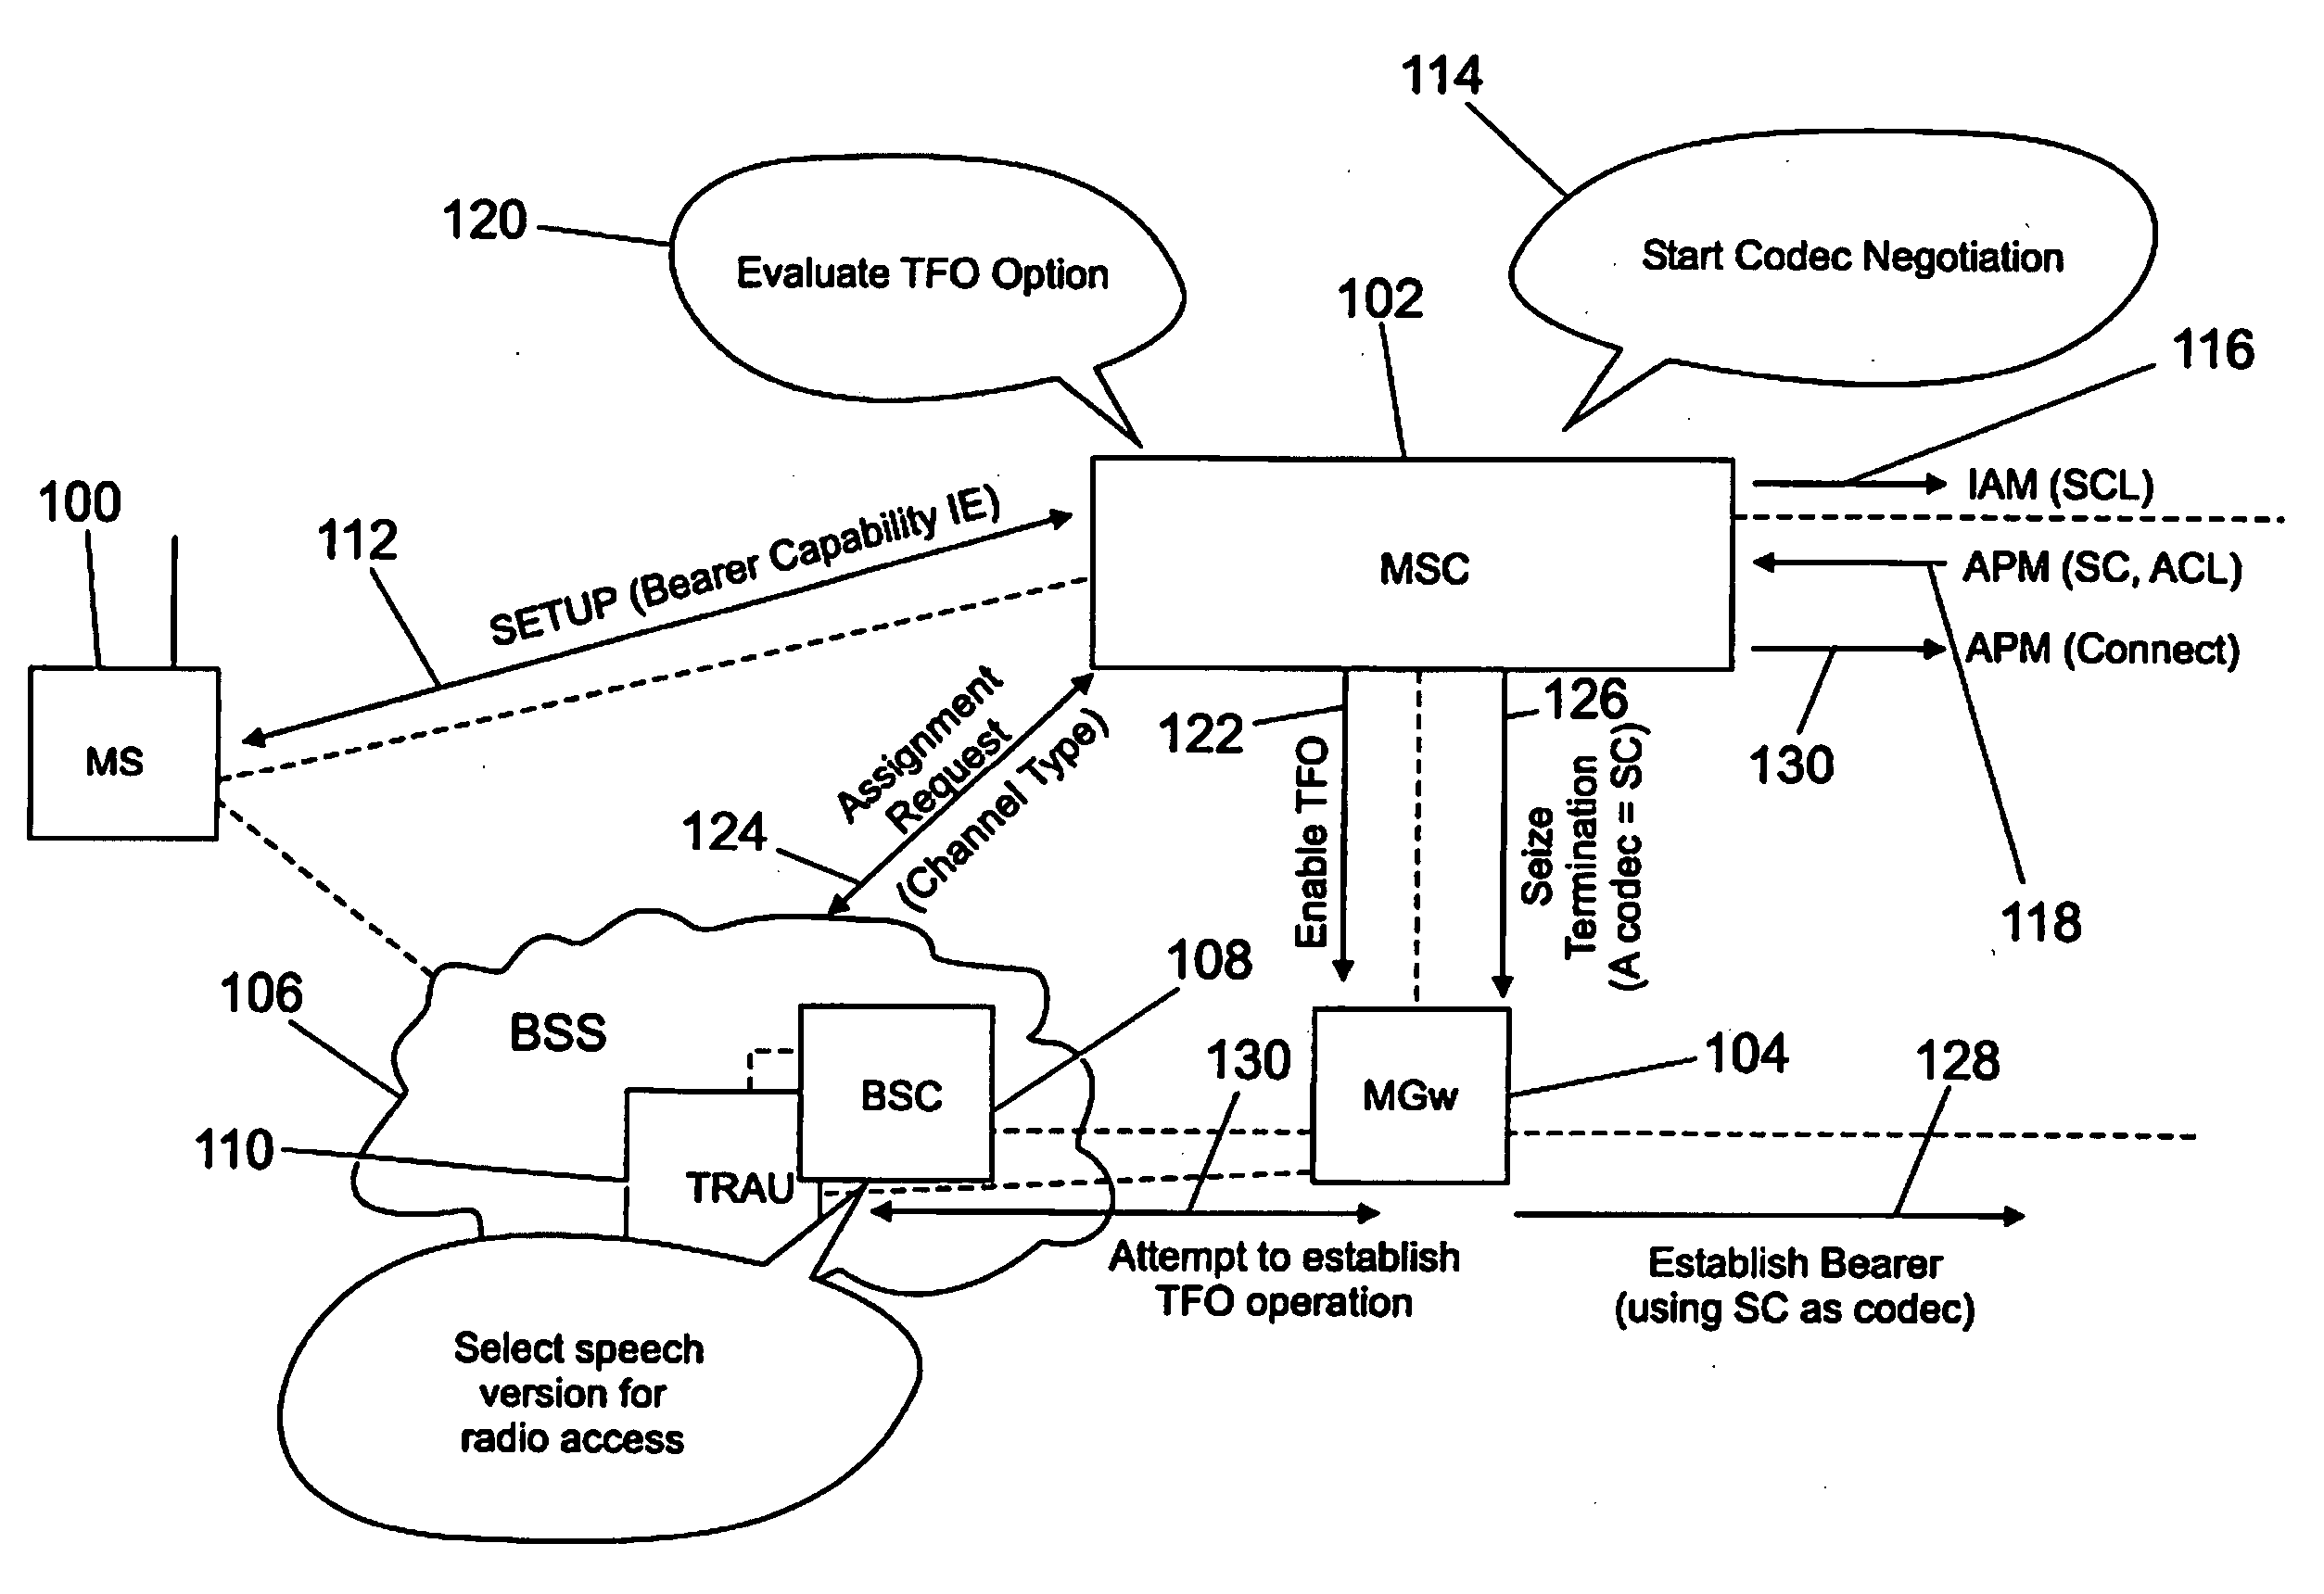 Method for codec negotiation and selection